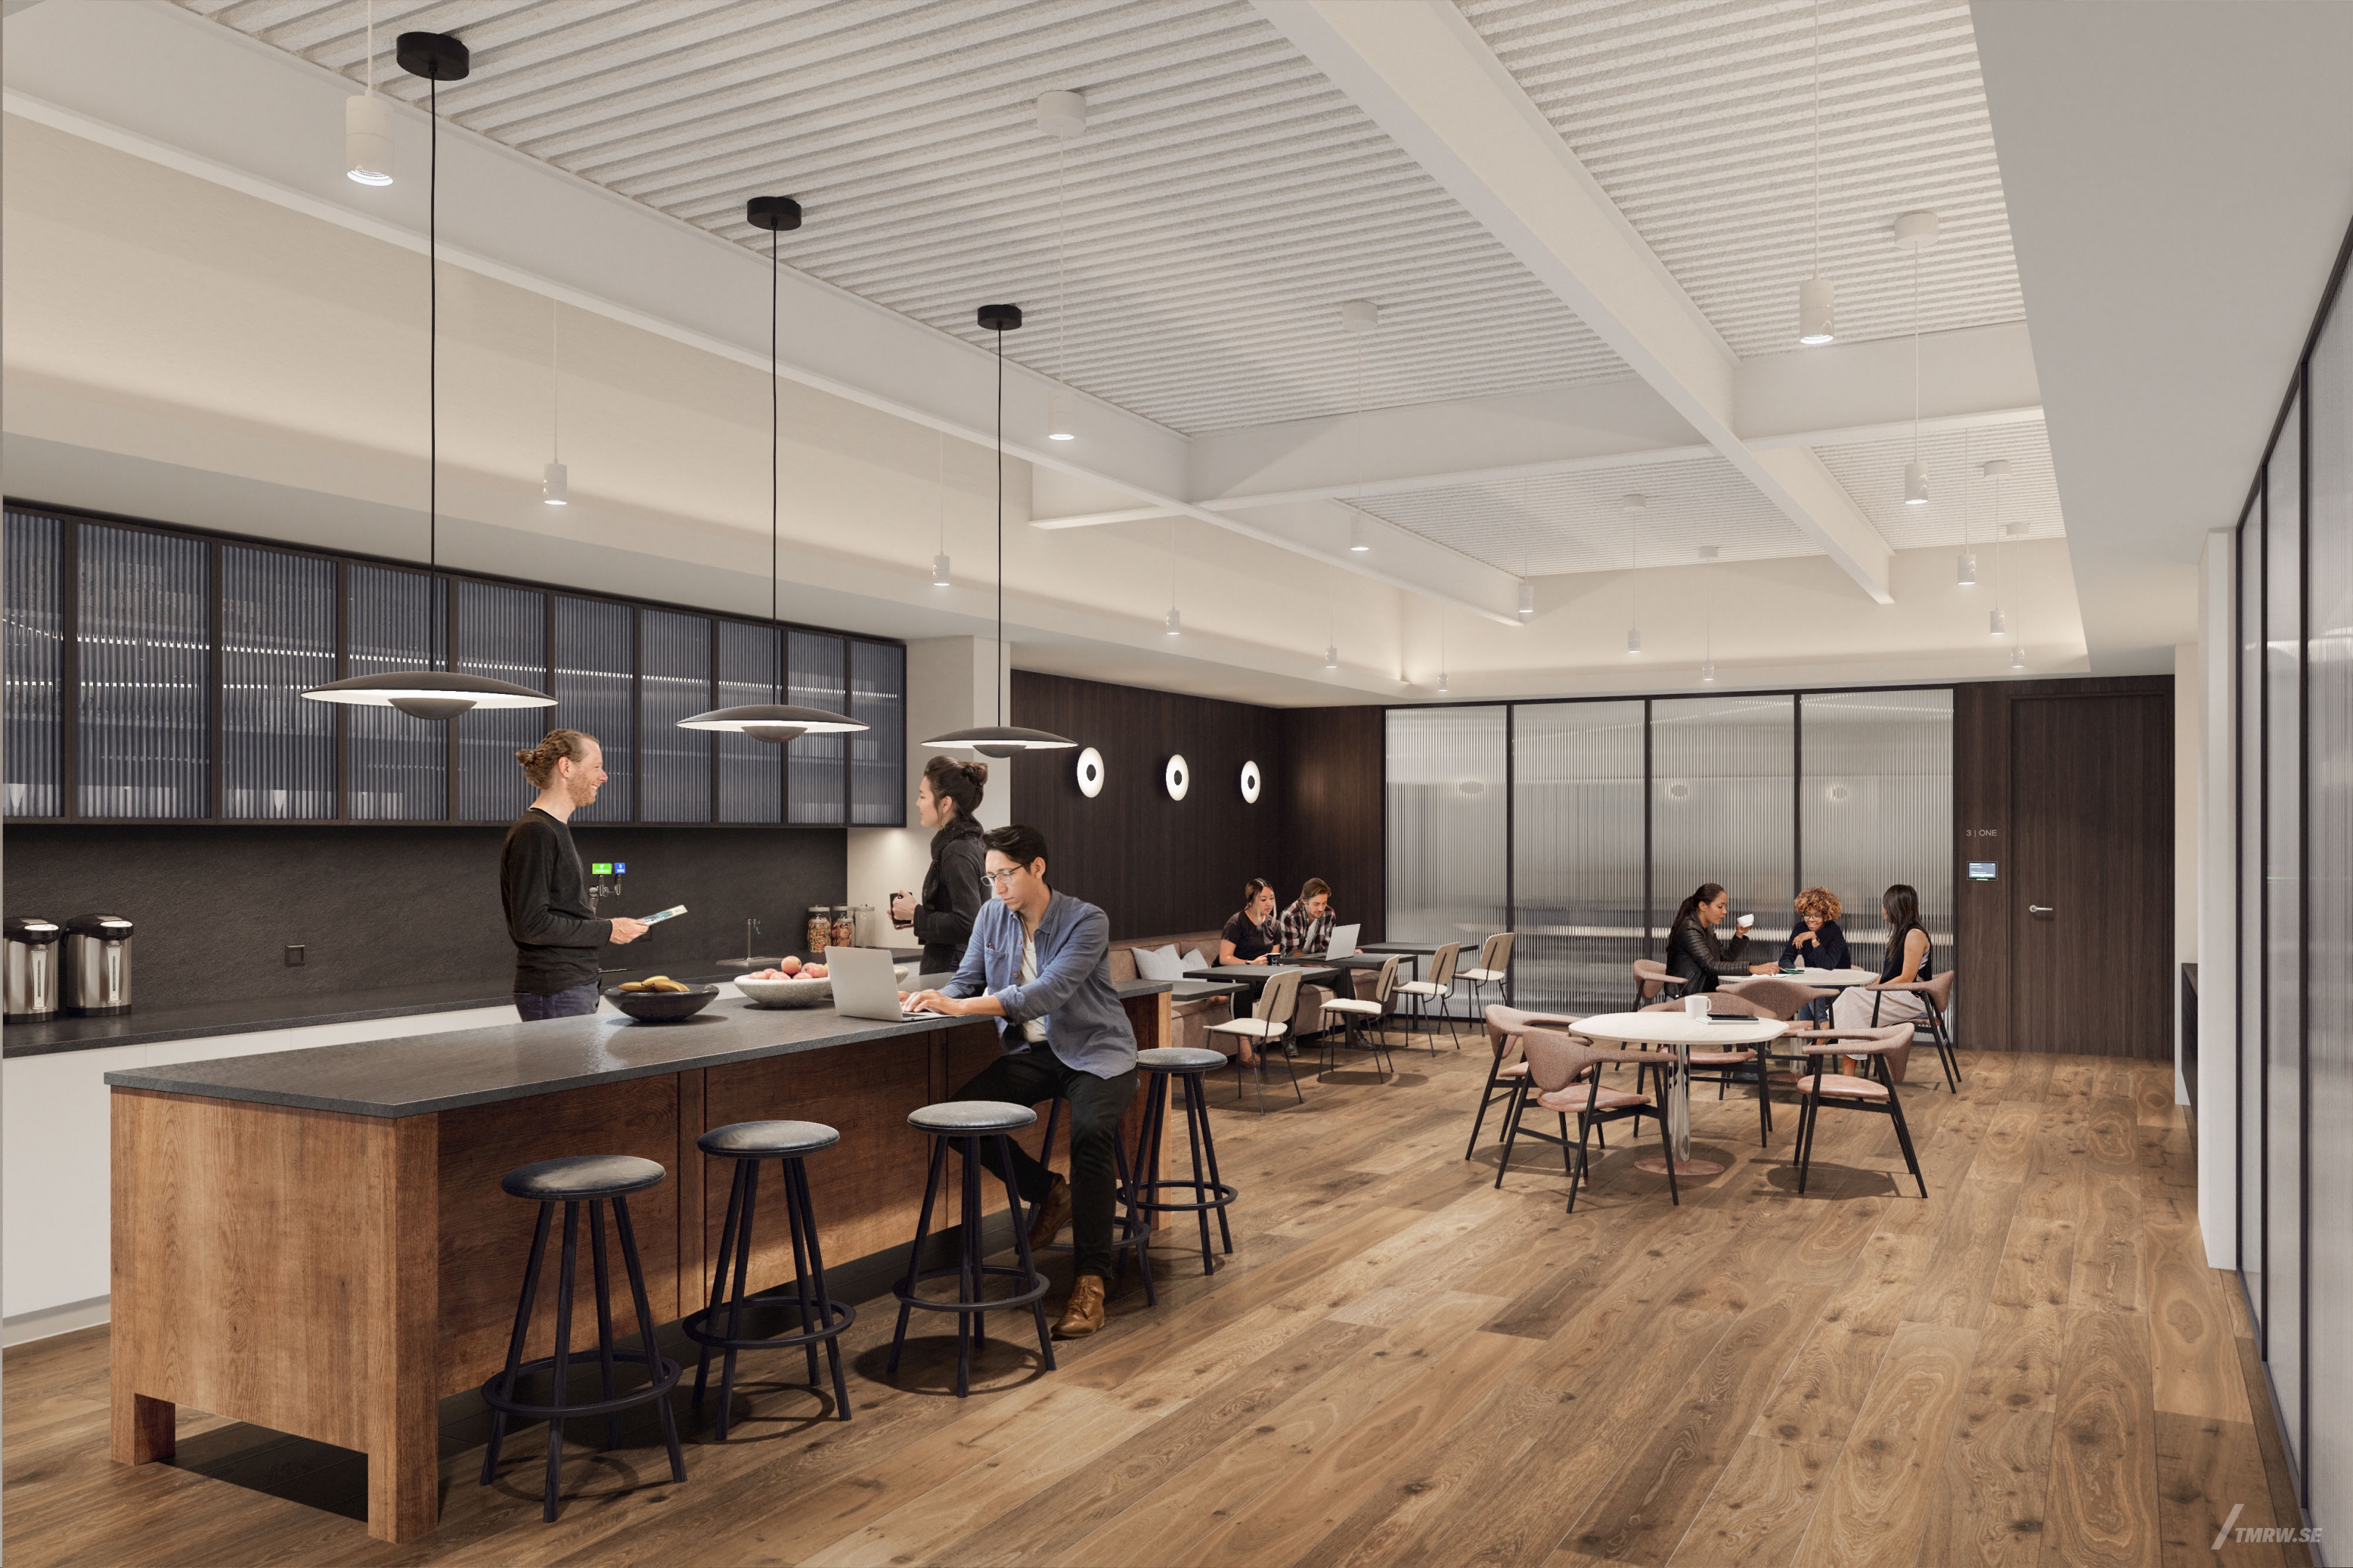 Architectural visualization of 225 Liberty for Brookfield Properties. An image of a kitchen office with people sitting at the tables in daylight.